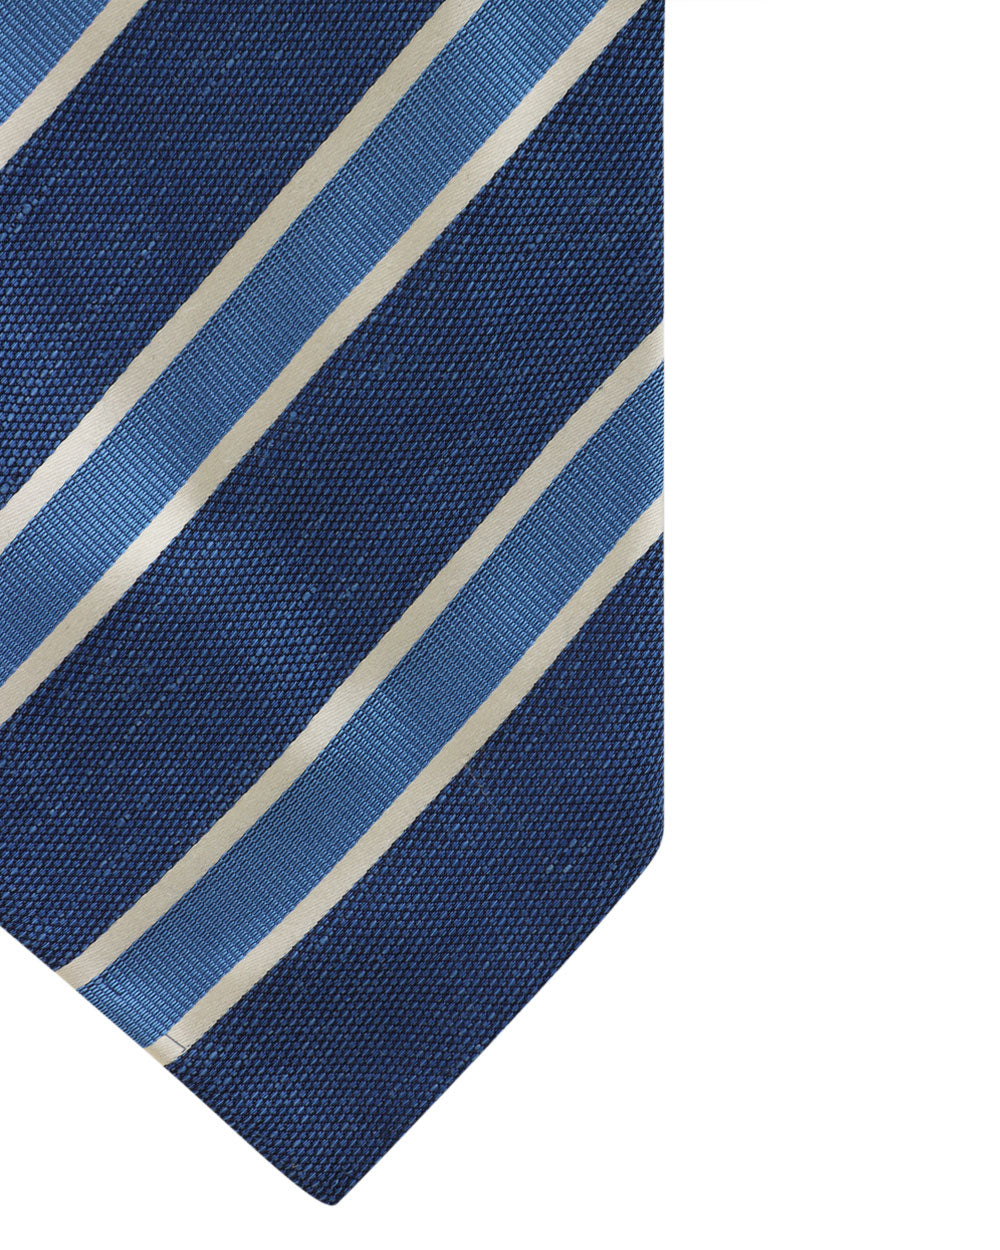 Sky Blue and White Striped Linen Blend Tie